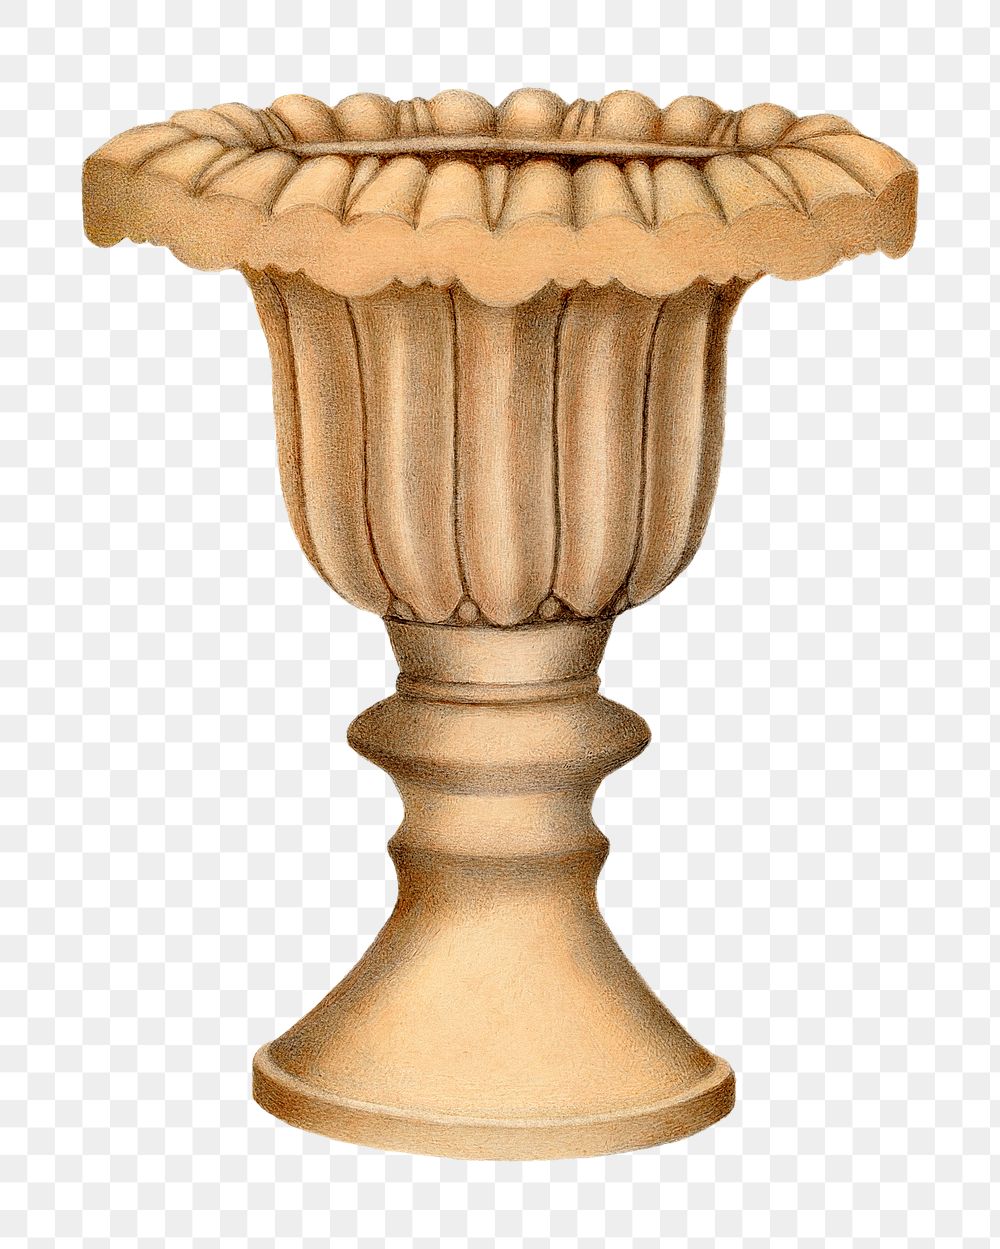 Vintage pottery vase png illustration, remixed from the artwork by Annie B. Johnston